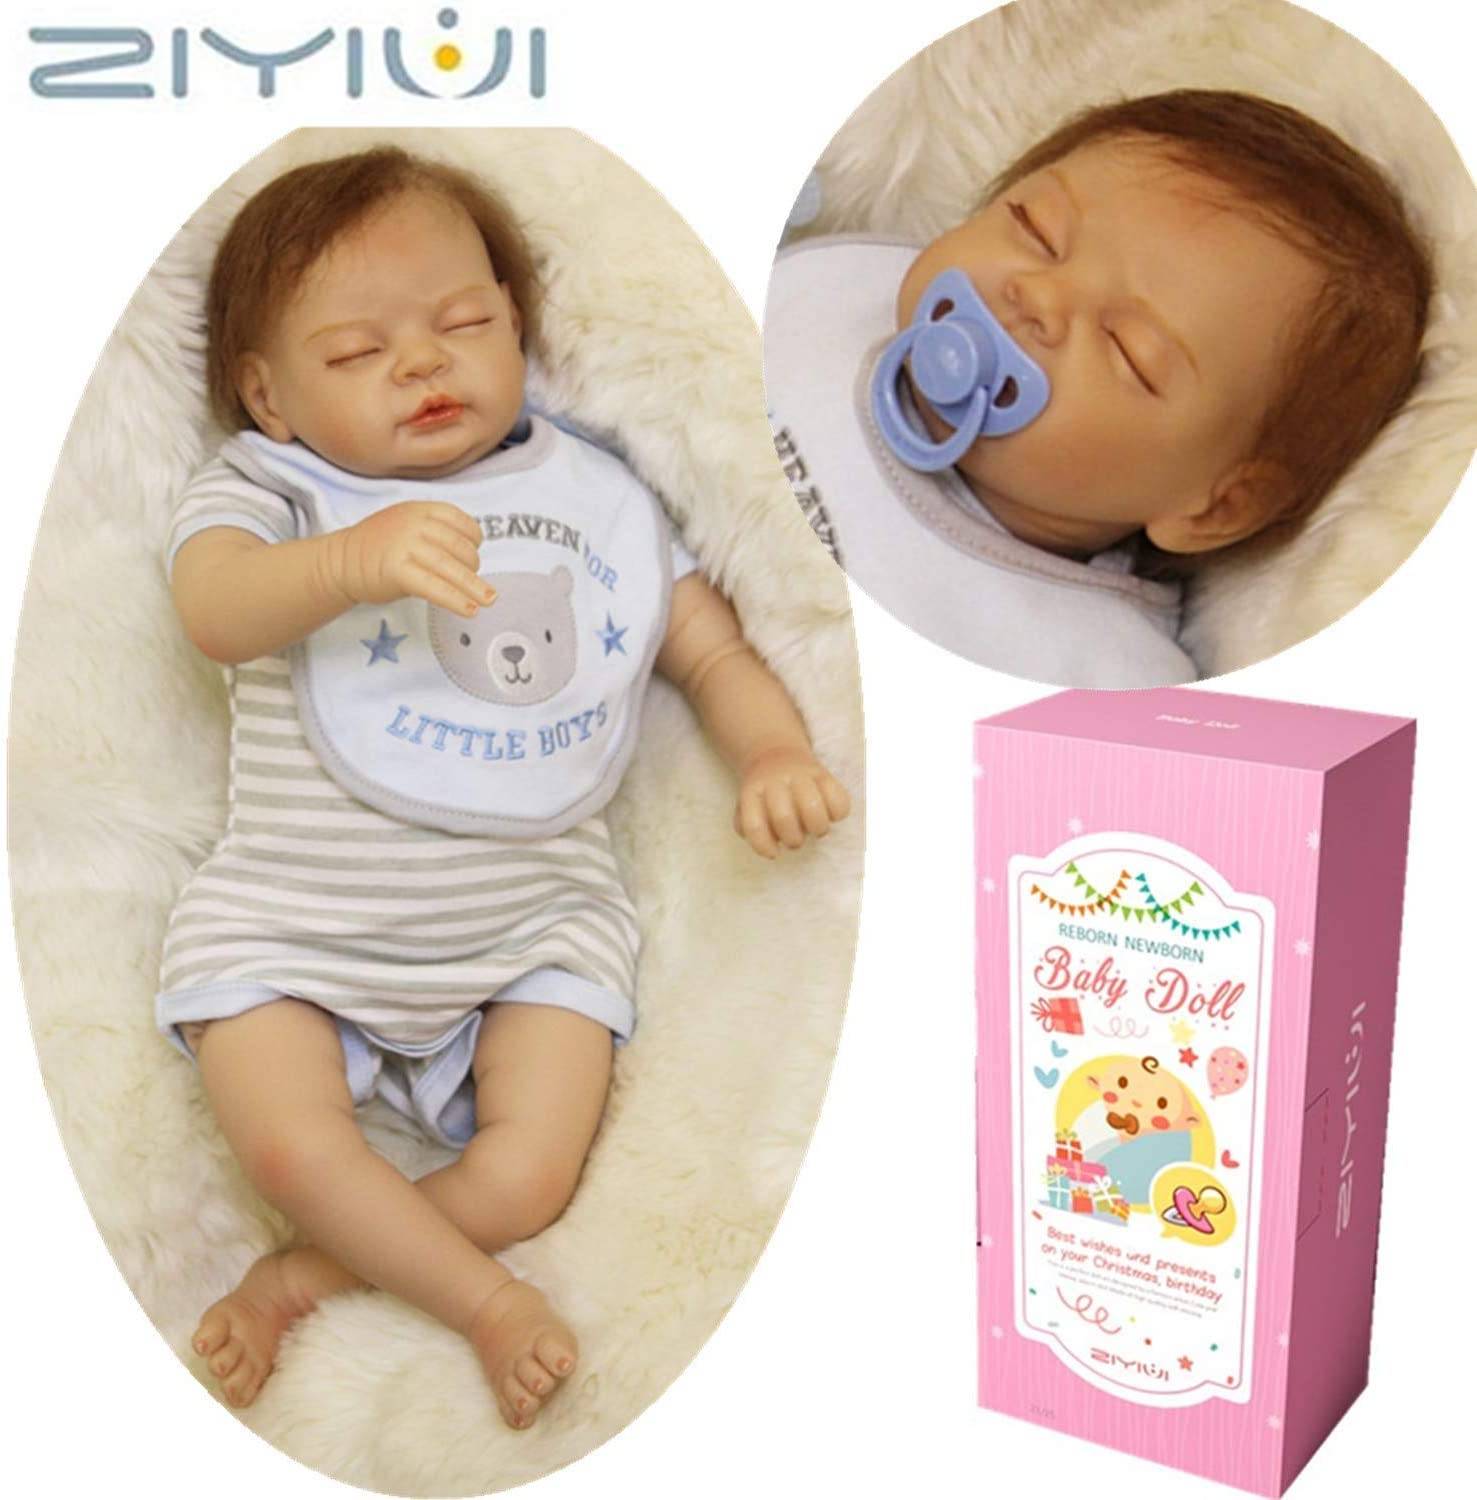 ZIYIUI Reborn Baby Dolls 22 ” 55 cmThat Looks Real Life Babies Realistic Toddler Pretty Boy Vinyl Newborn Soft Silicone Doll Magnetic Mouth Birthday Gift Toys for age 3+